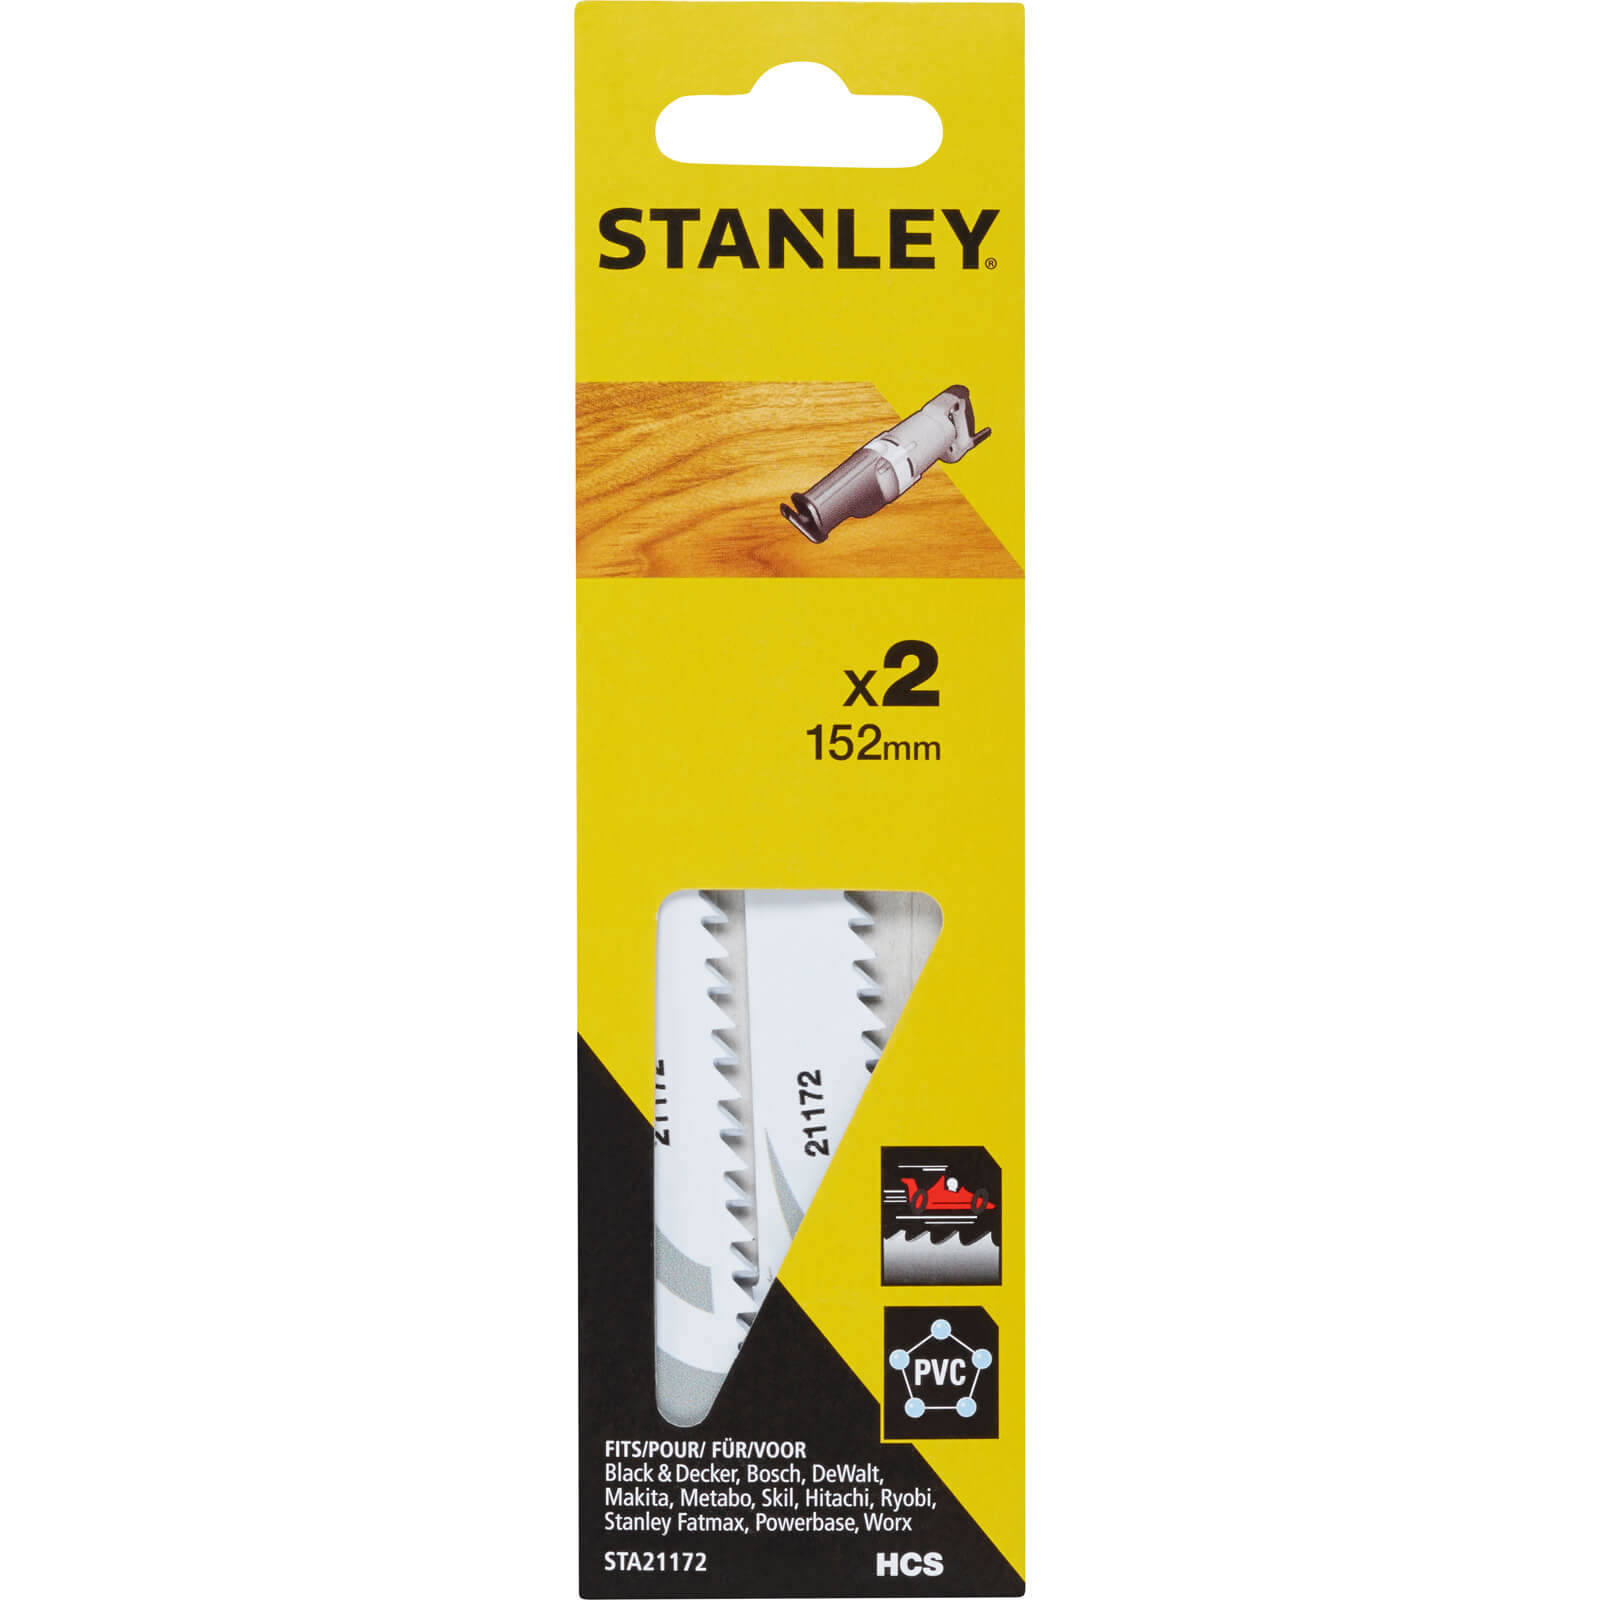 Photos - Power Tool Accessory Stanley Fast Wood Cutting Reciprocating Saw Blades 152mm Pack of 2 STA2117 